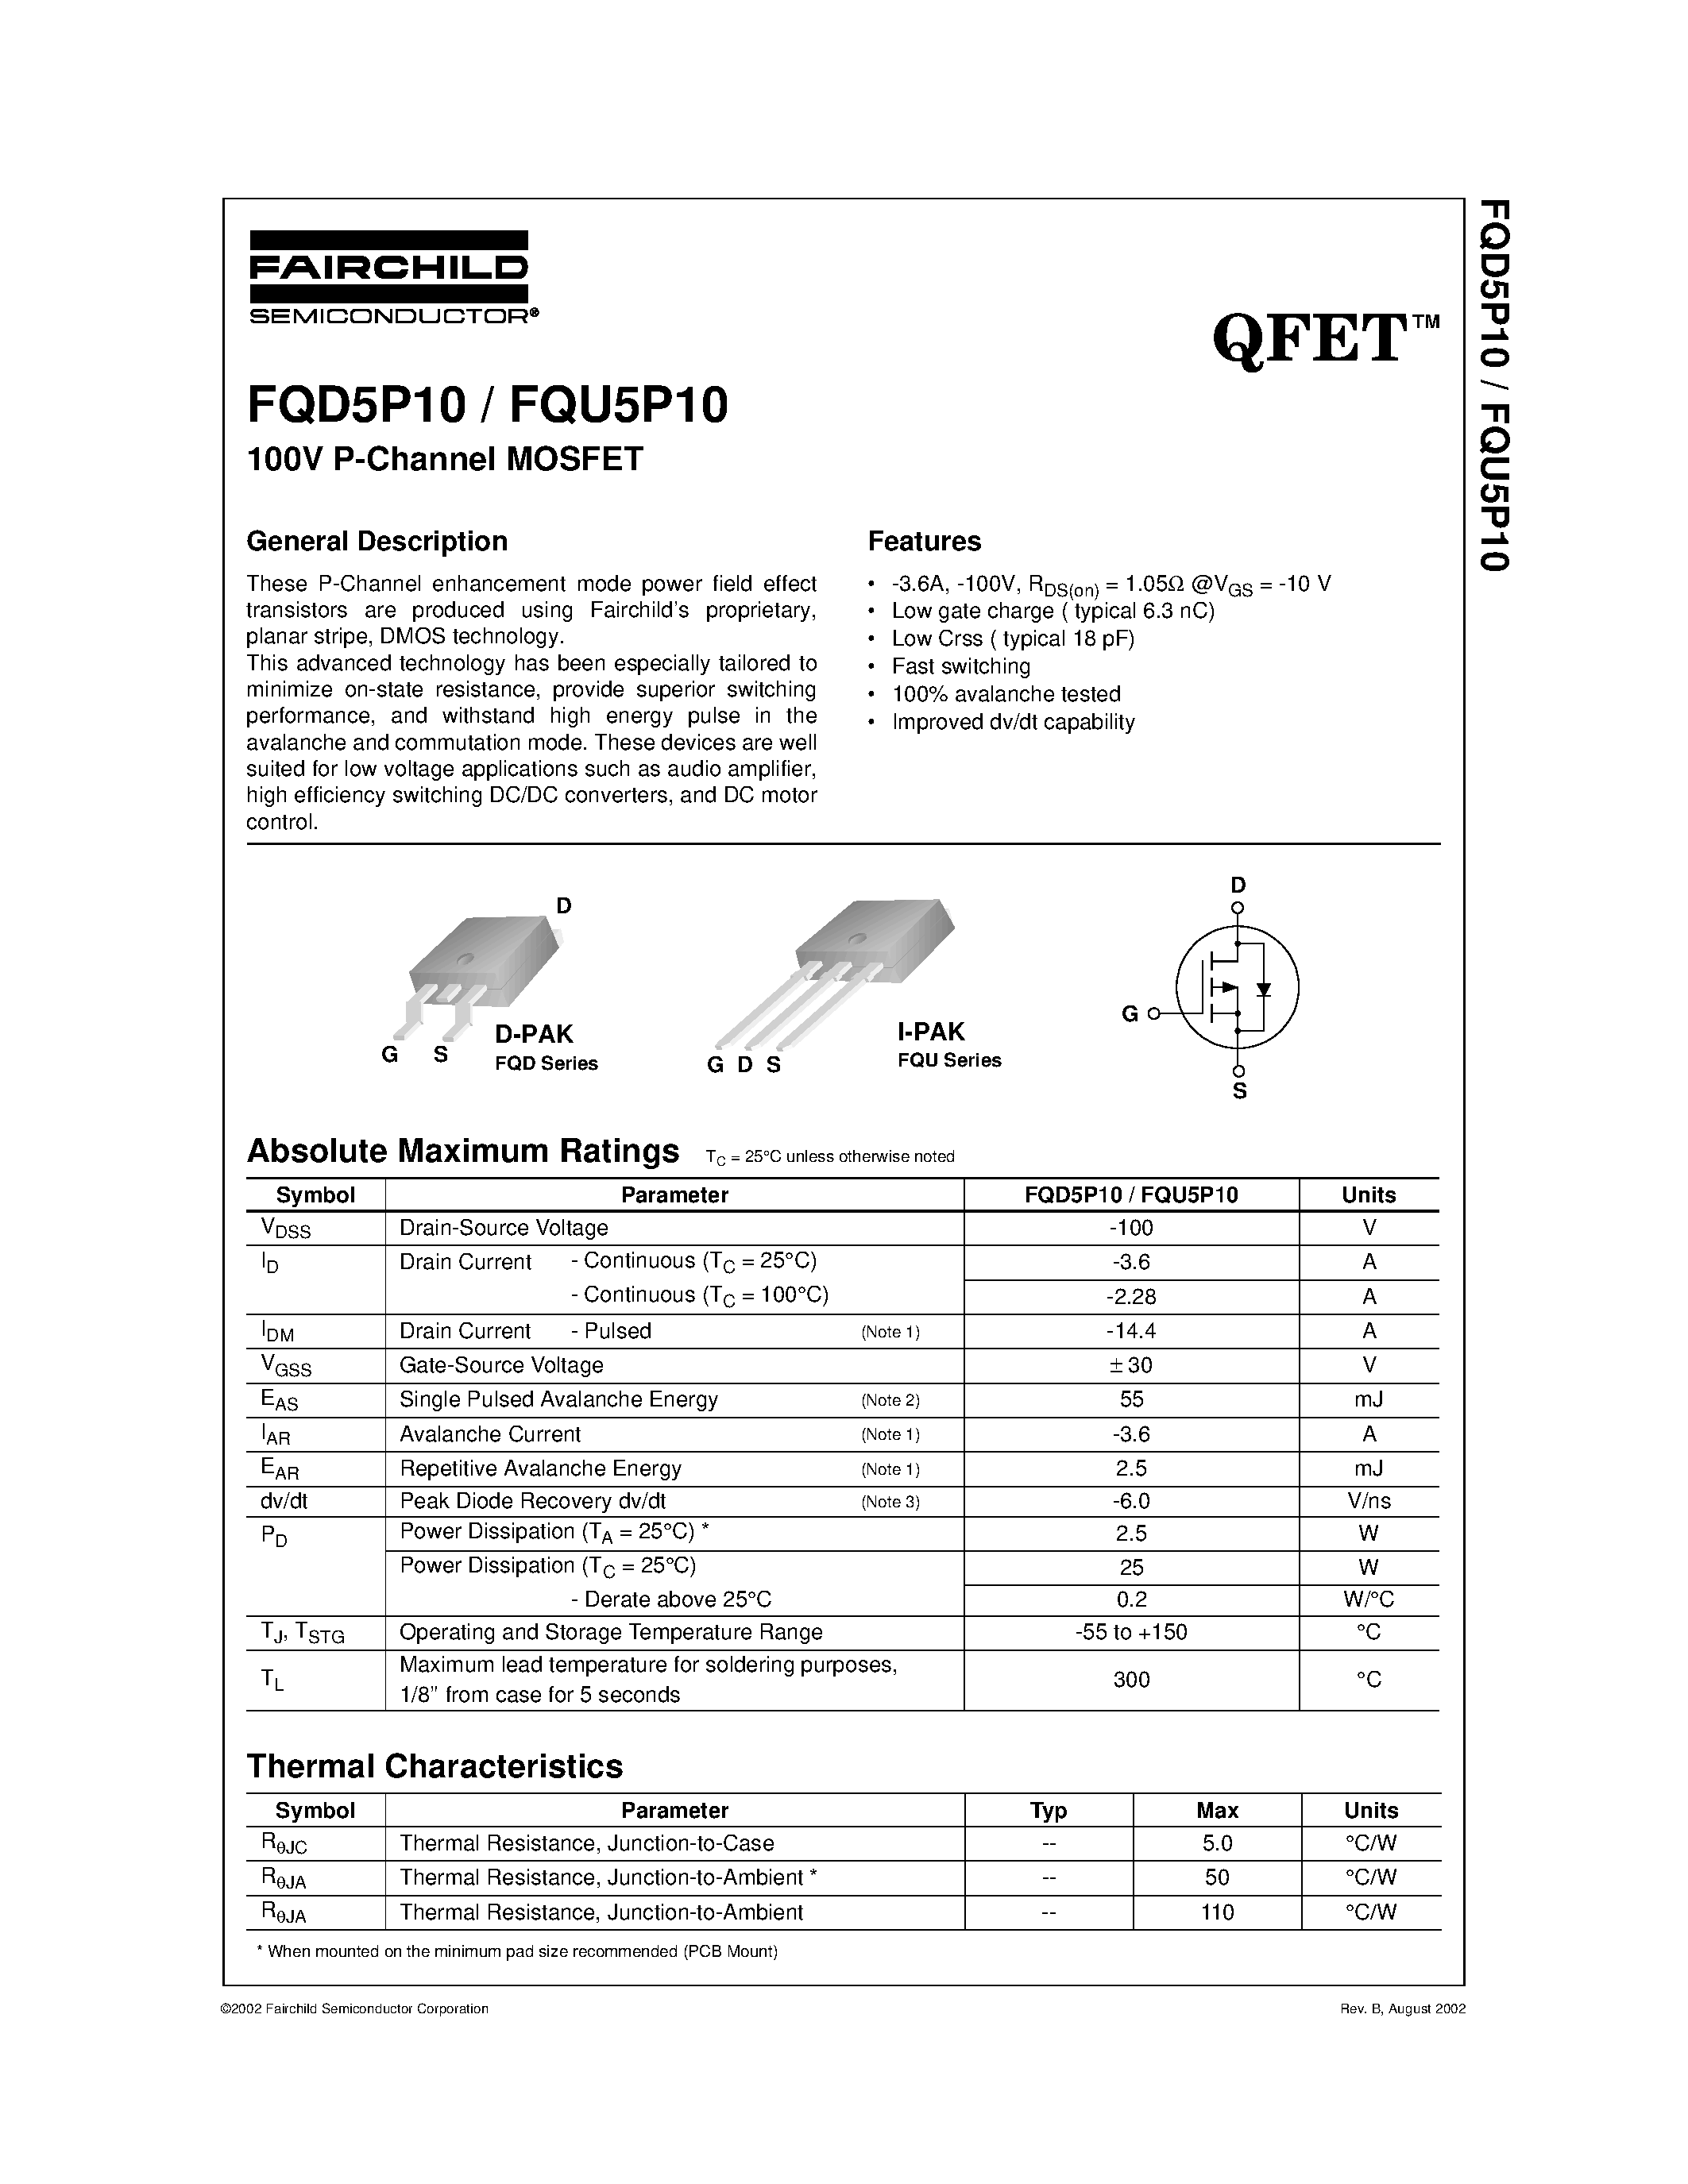 Datasheet FQD5P10 - 100V P-Channel MOSFET page 1